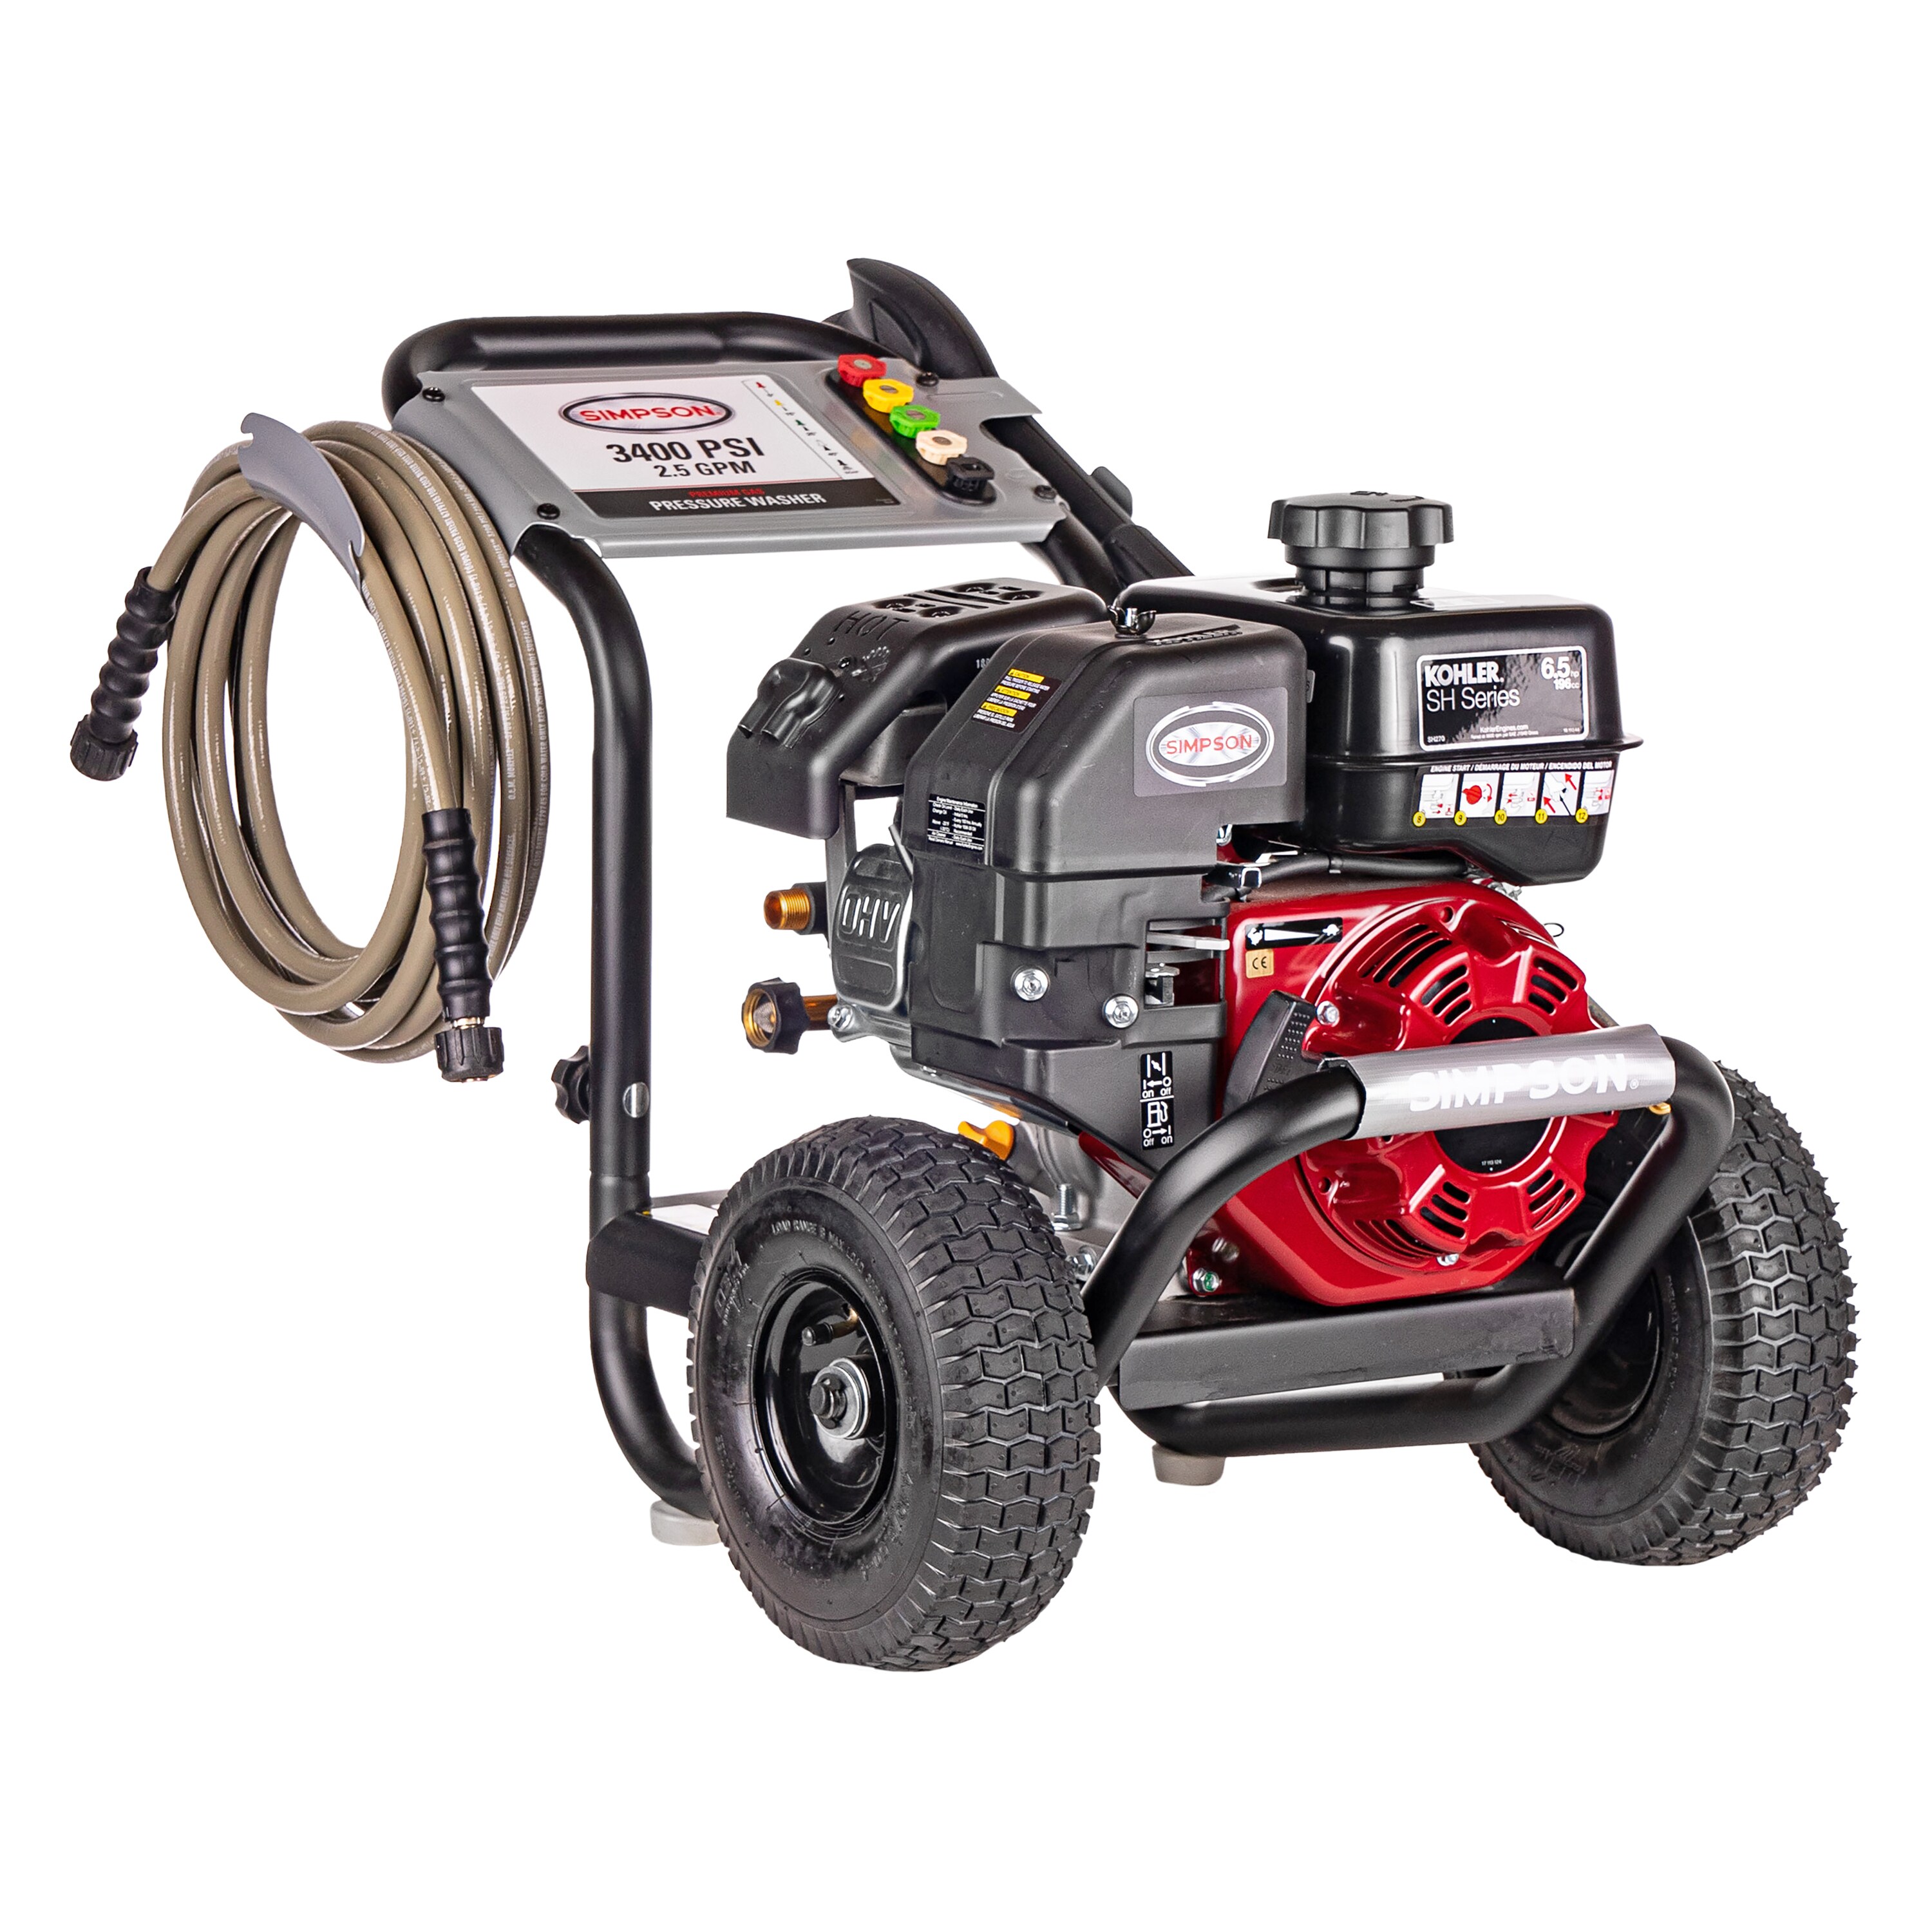 Commercial Pressure Washers & Accessories at